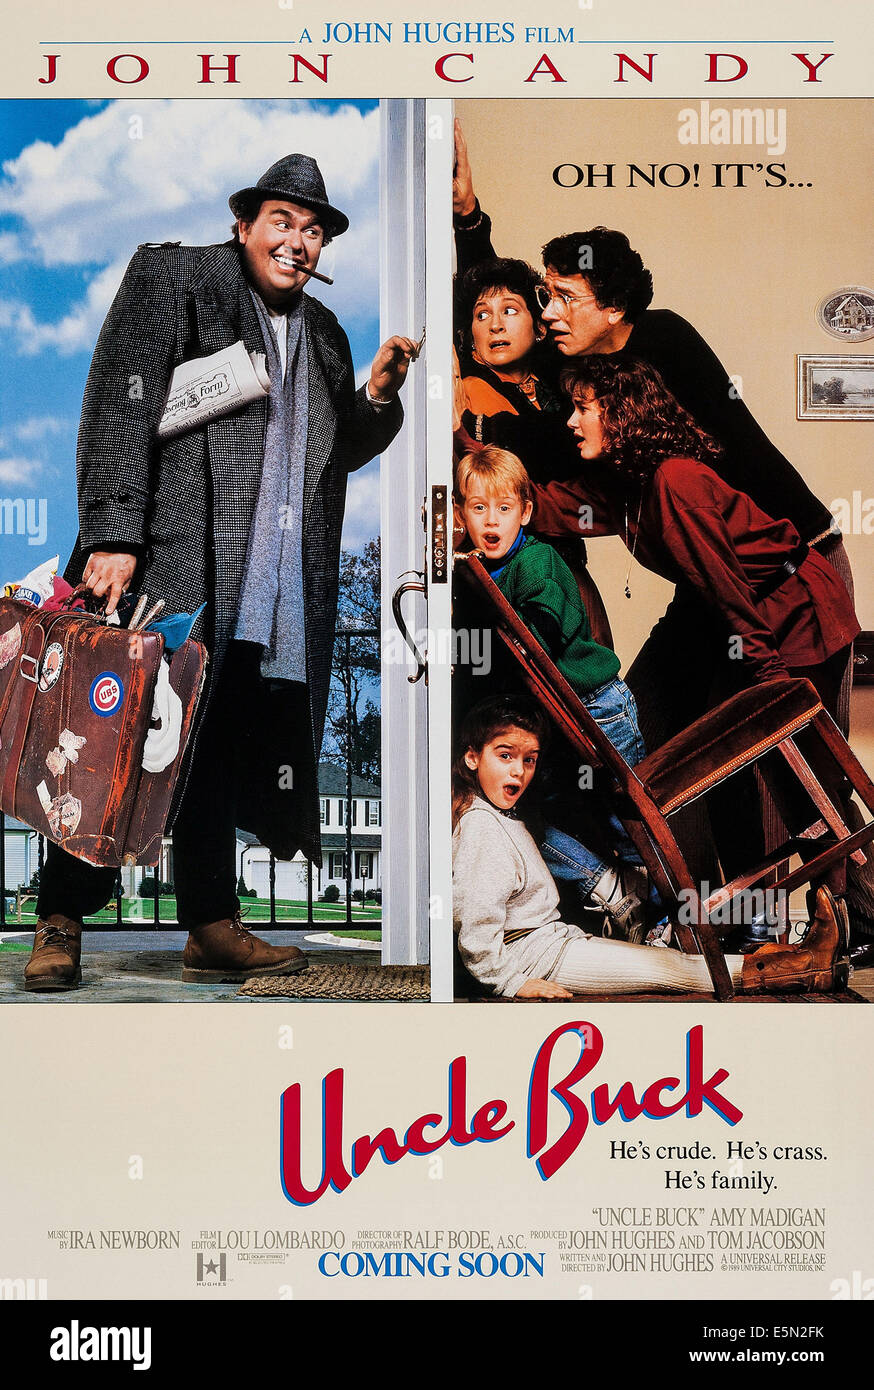 UNCLE BUCK, US poster art, from left: John Candy, right clockwise from left: Elaine Bromka, Garrett M. Brown, Jean Louisa Stock Photo